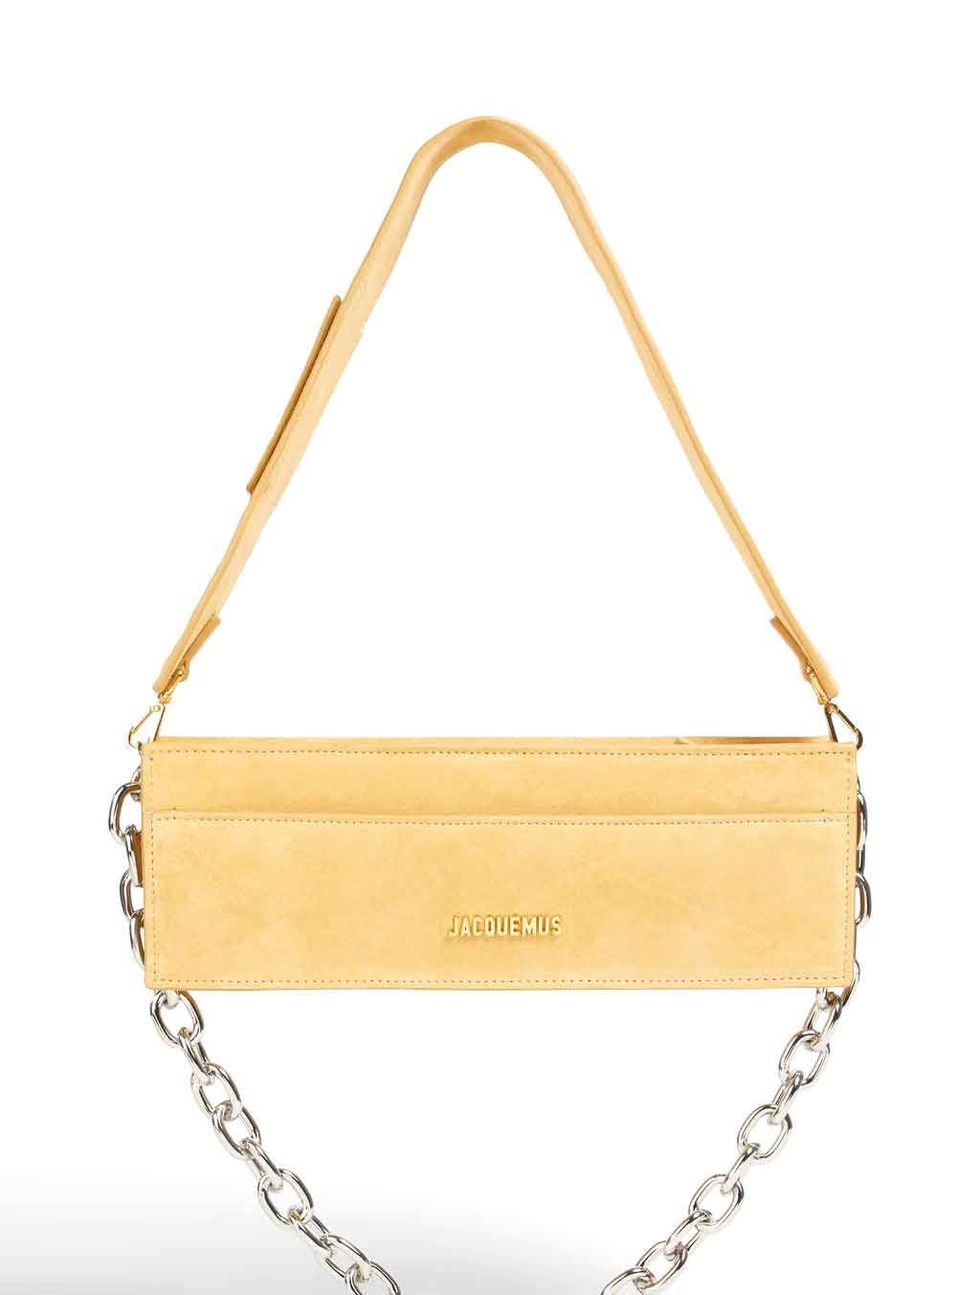 Aesther Ekme Dusty Yellow Mini Sac at Baby & Company